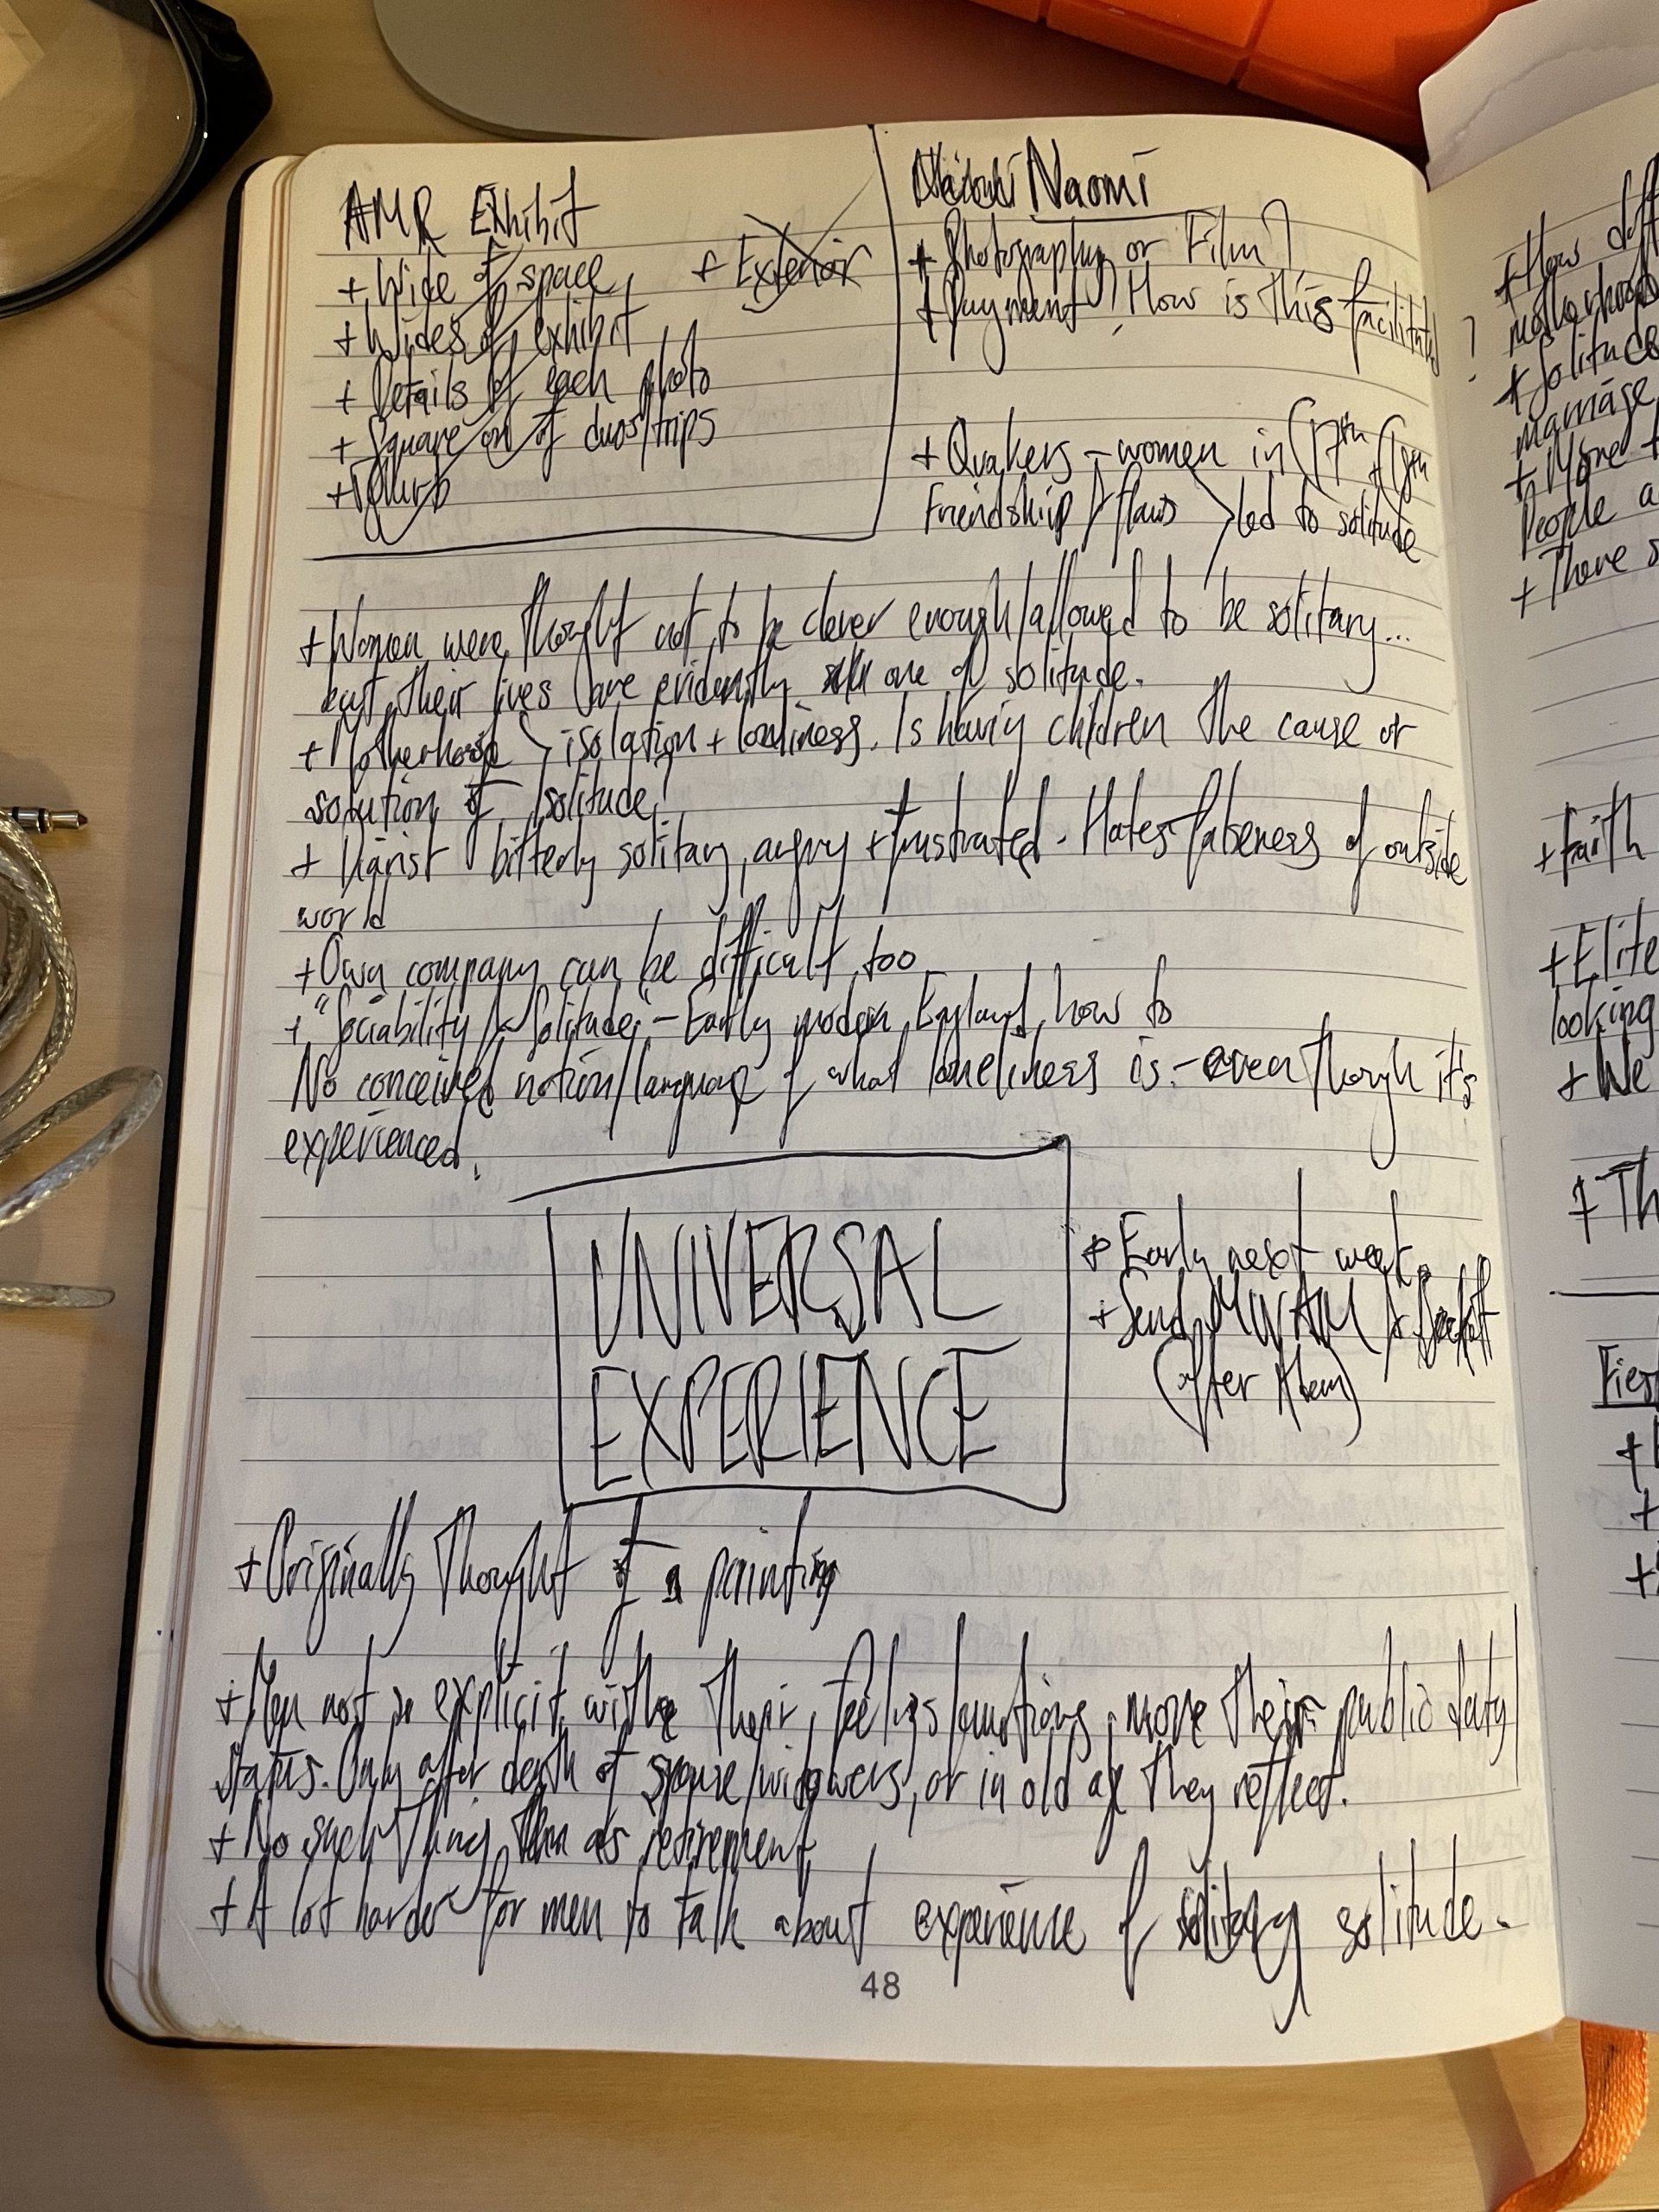 pages from the artist's diary documenting the project